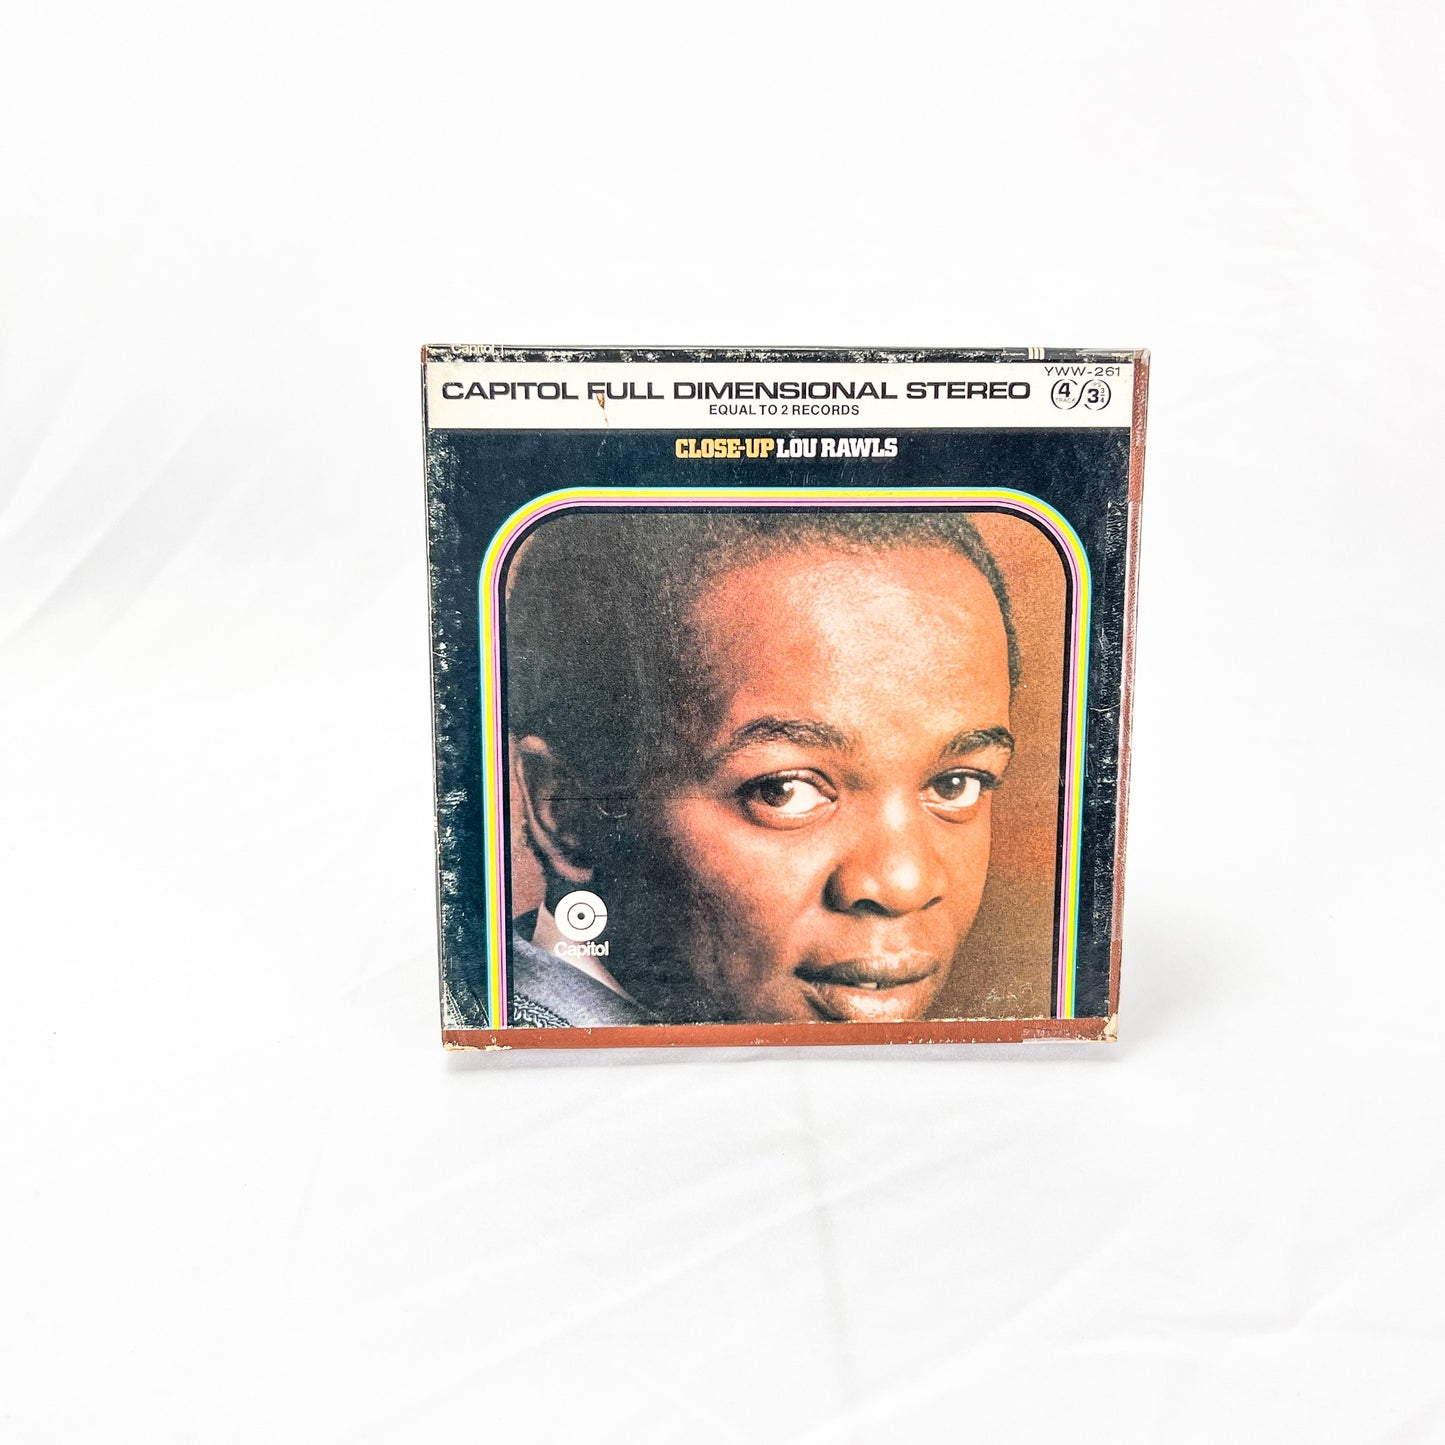 Close-Up Lou Rawls Reel to Reel Tape 3 3/4 IPS Capitol